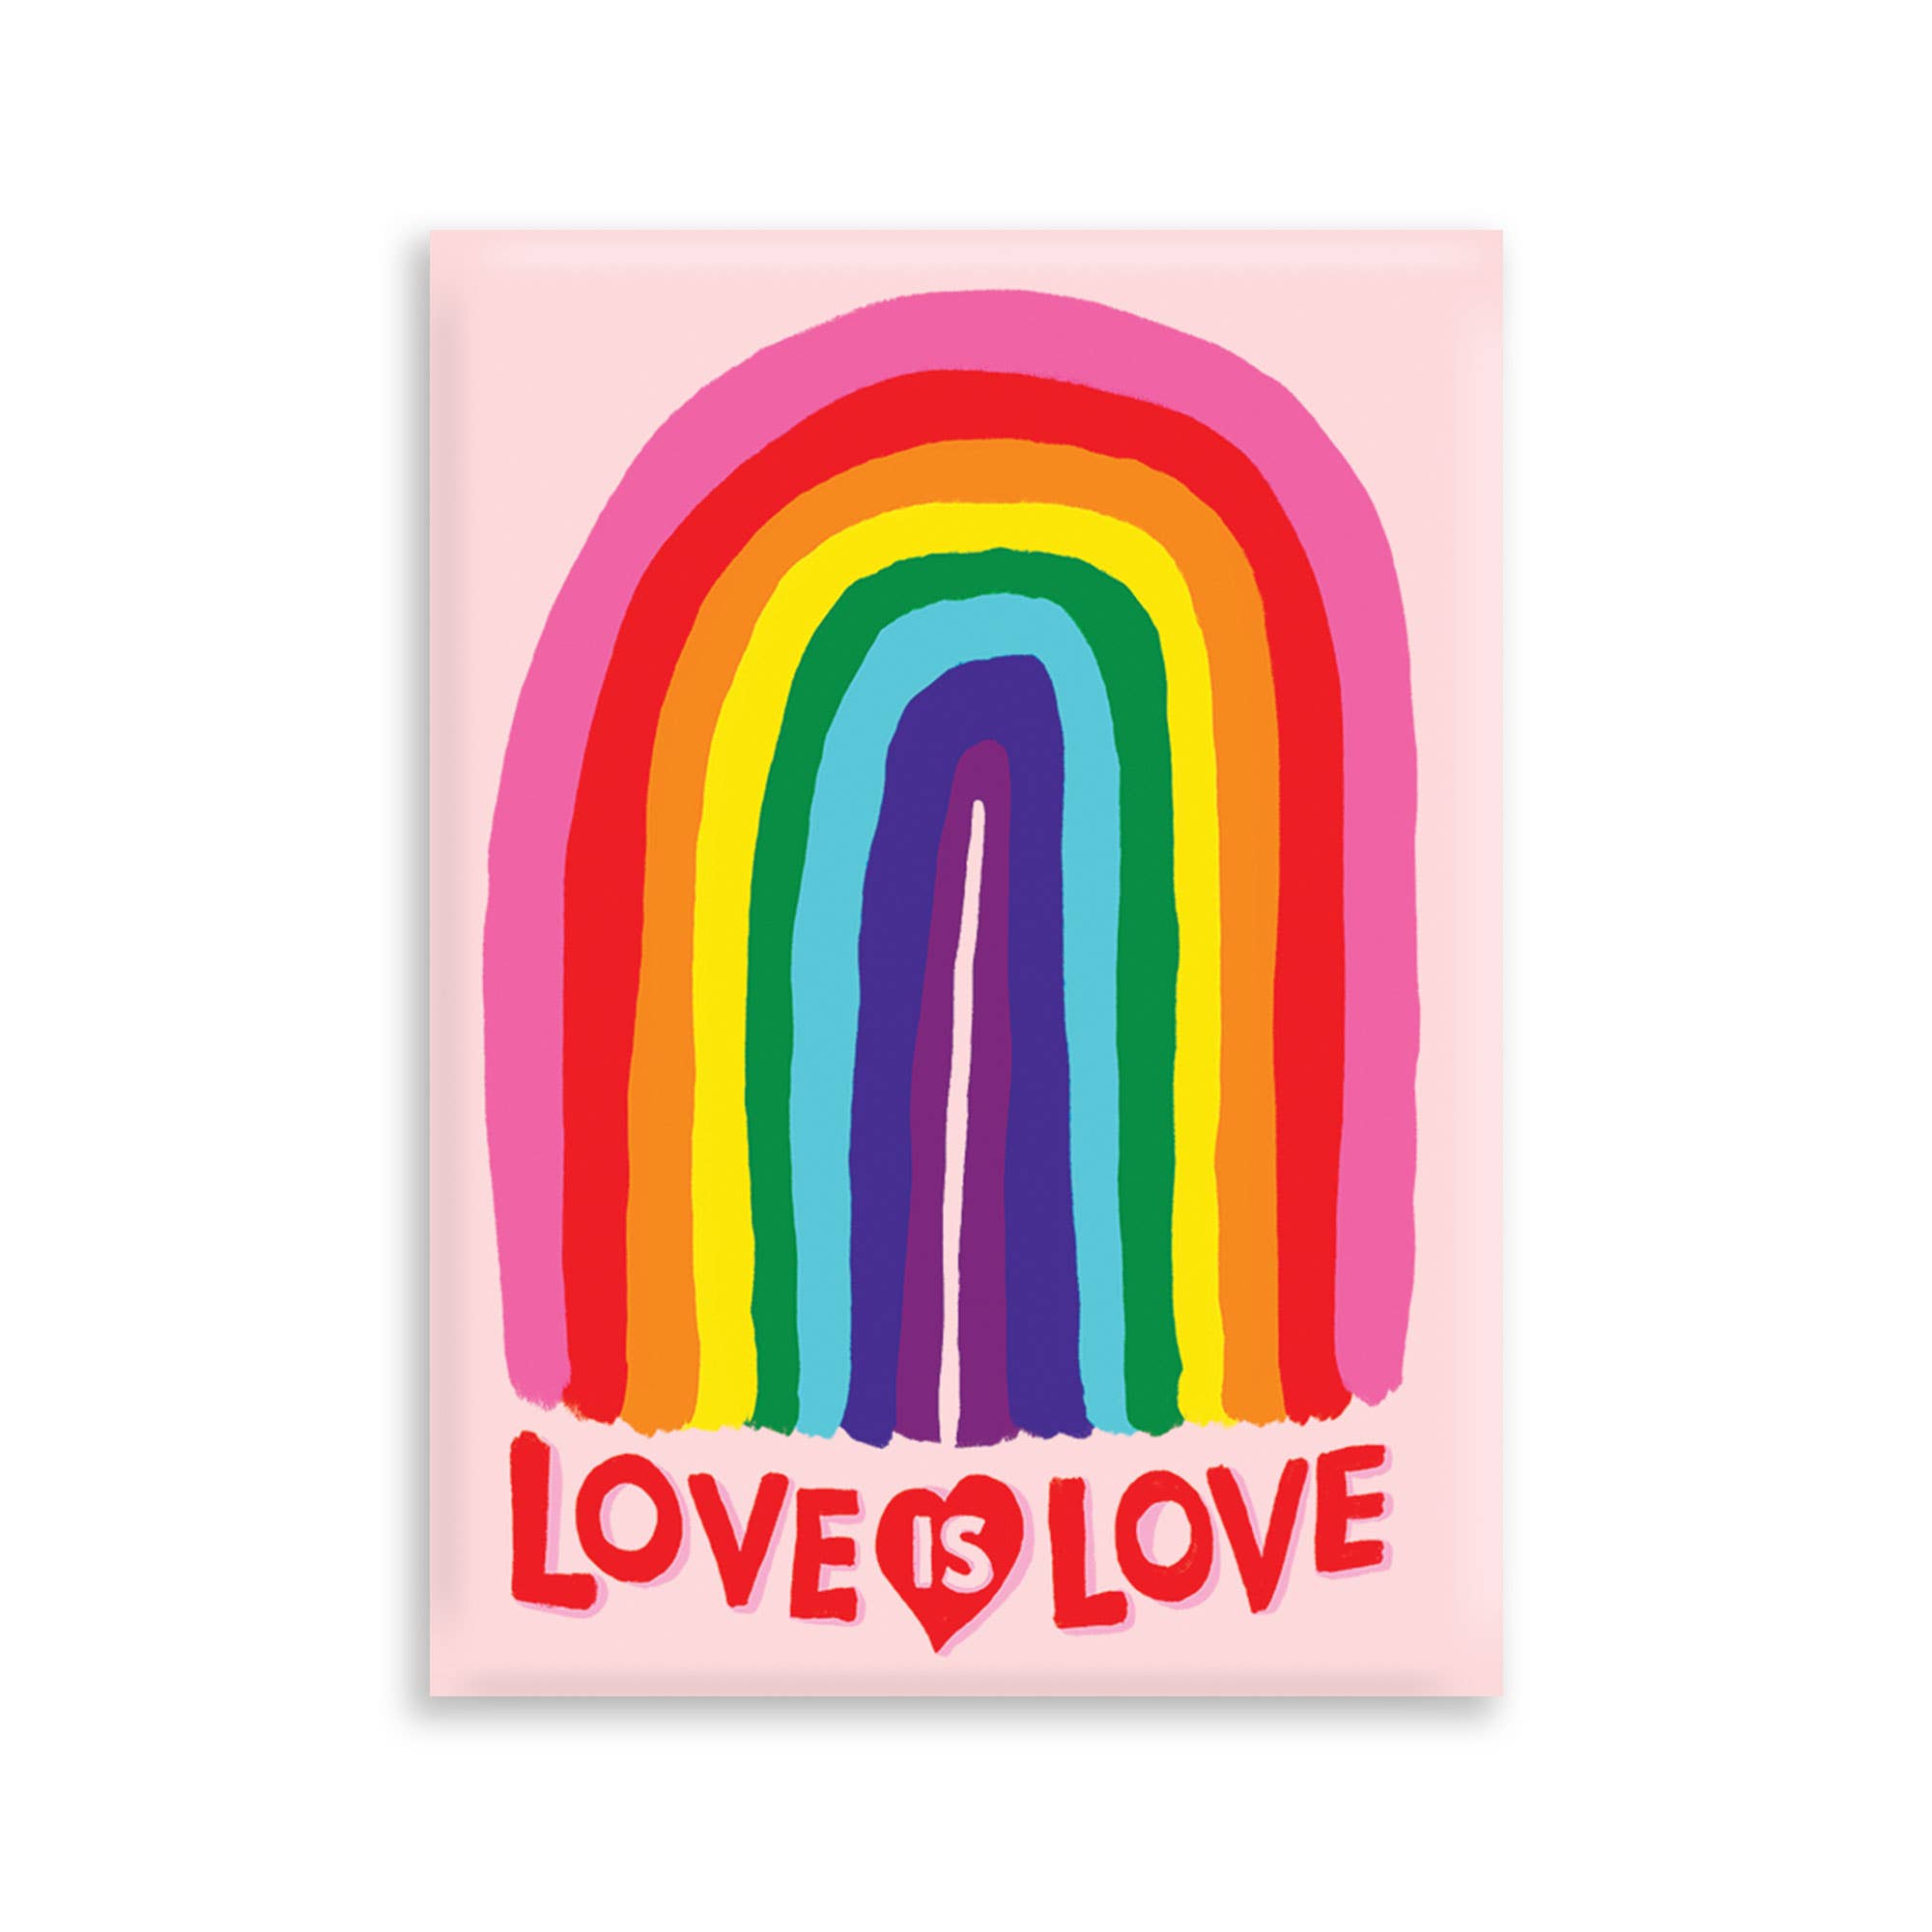 Love is Love Magnet - Spiral Circle